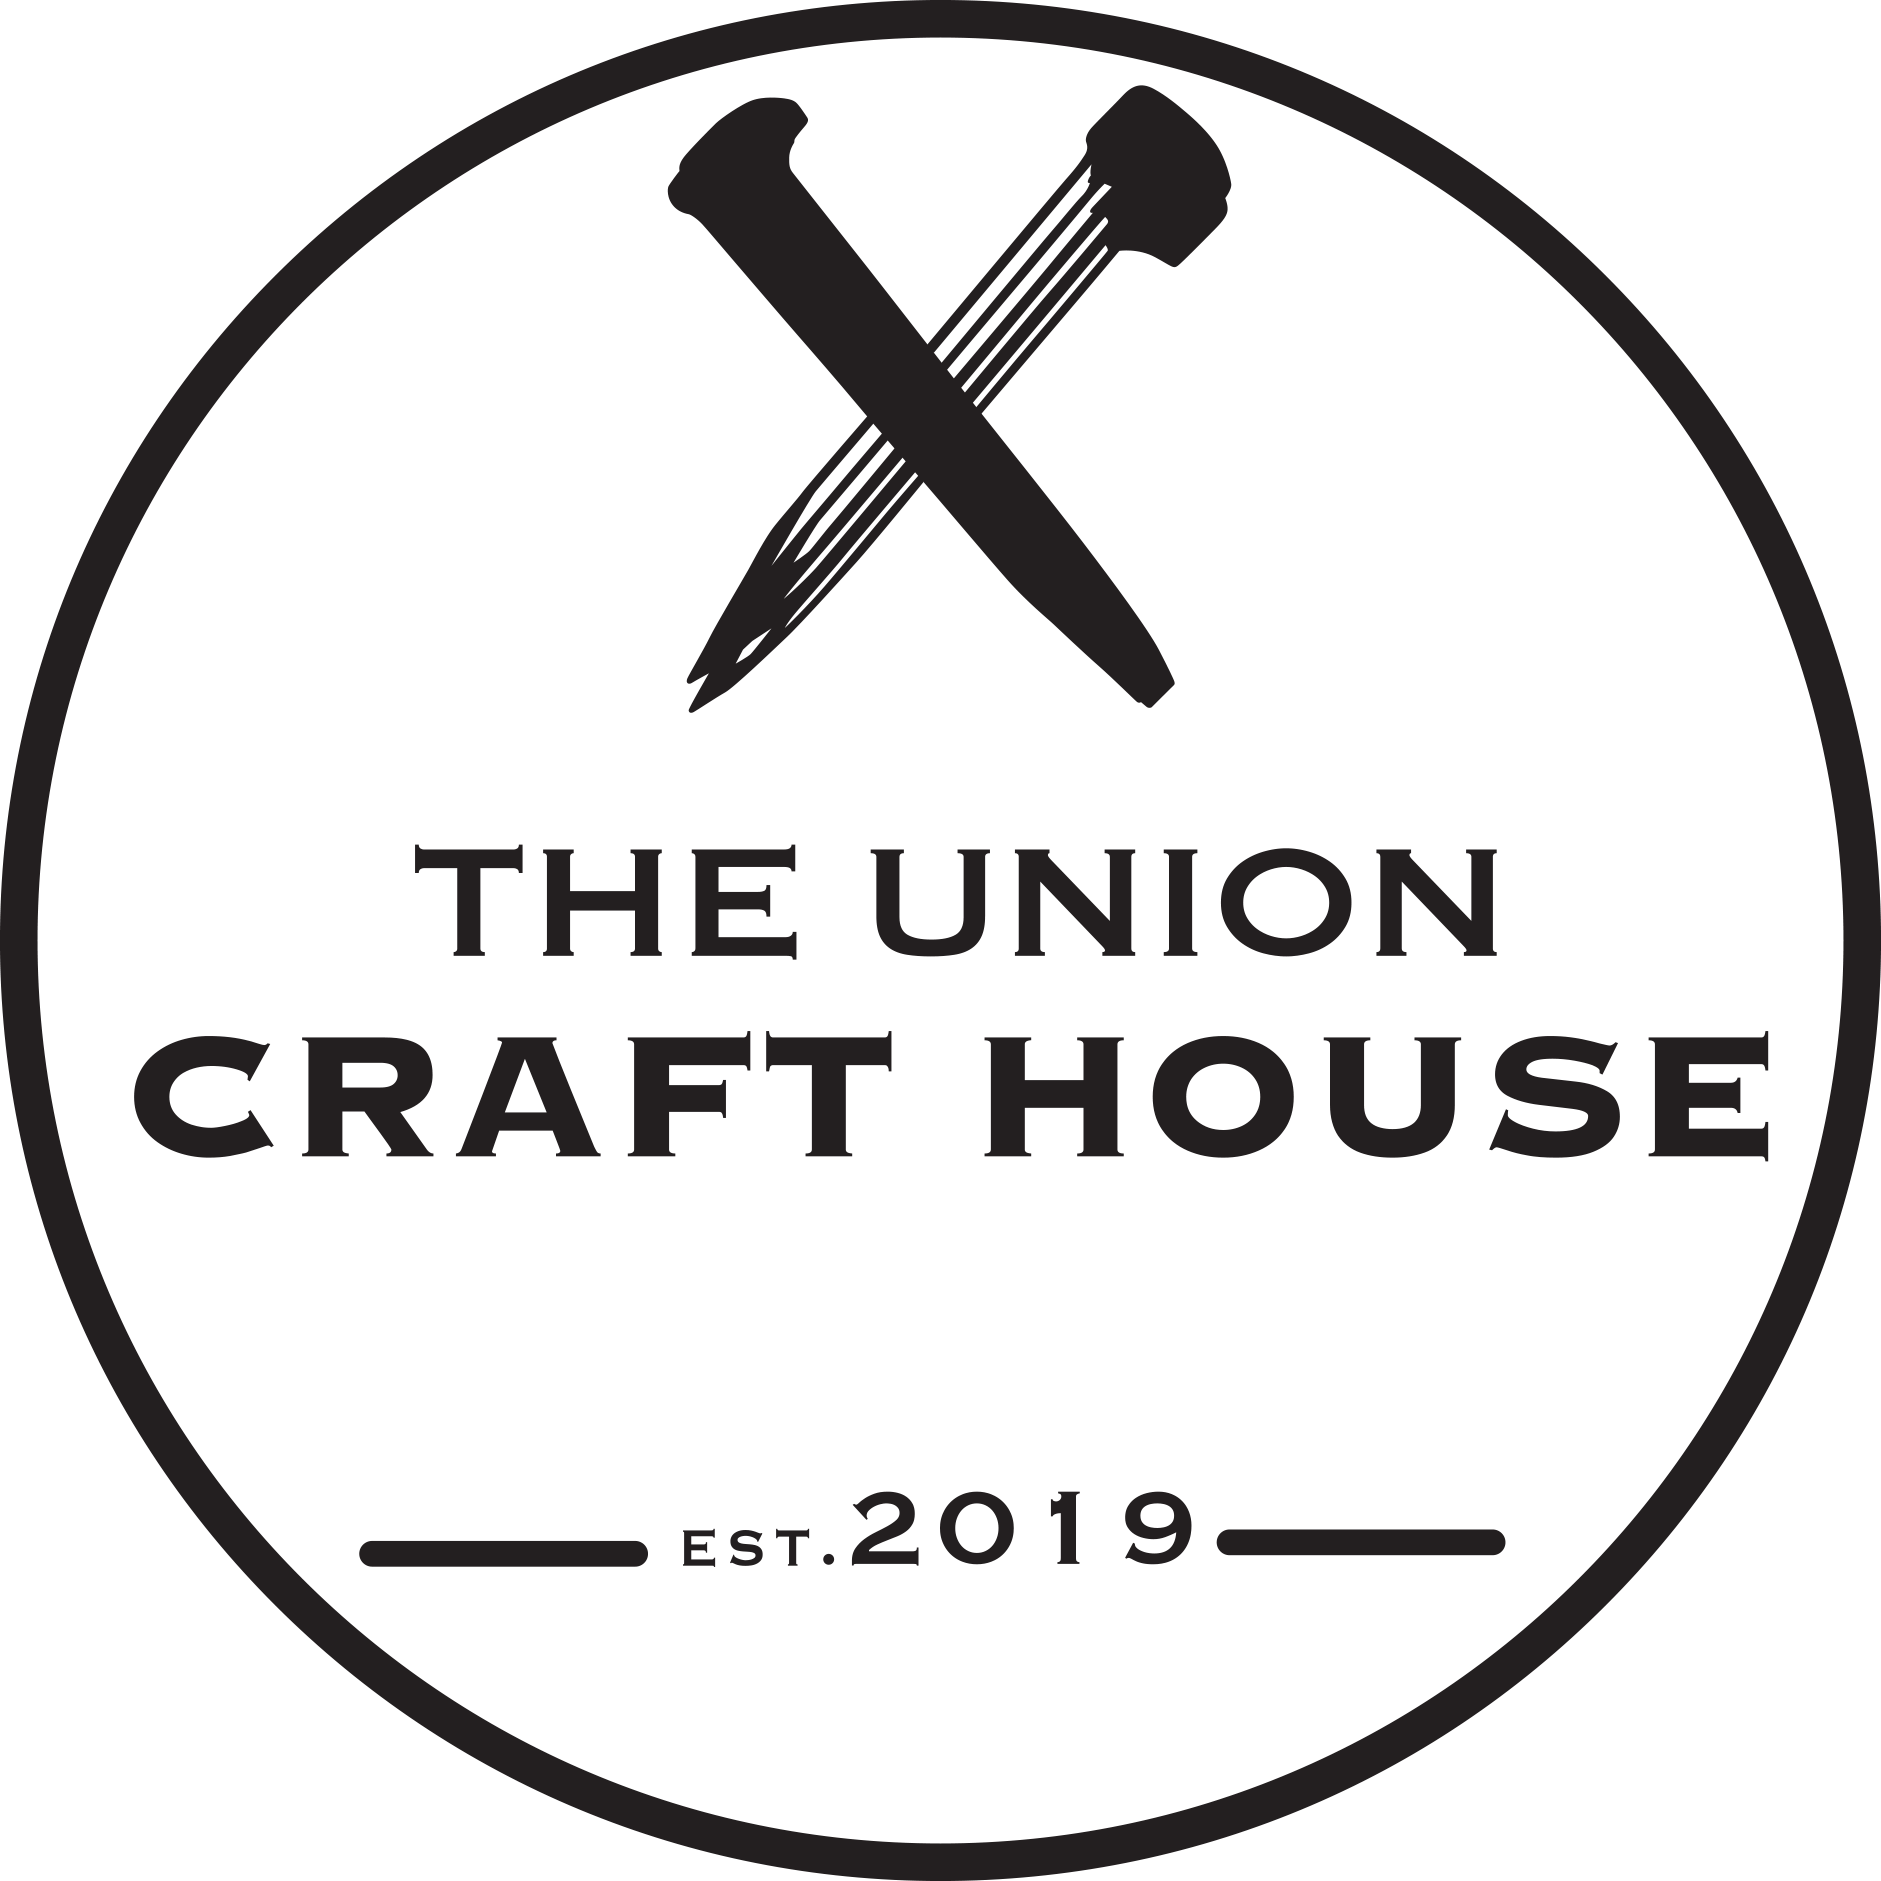 The Union Craft House